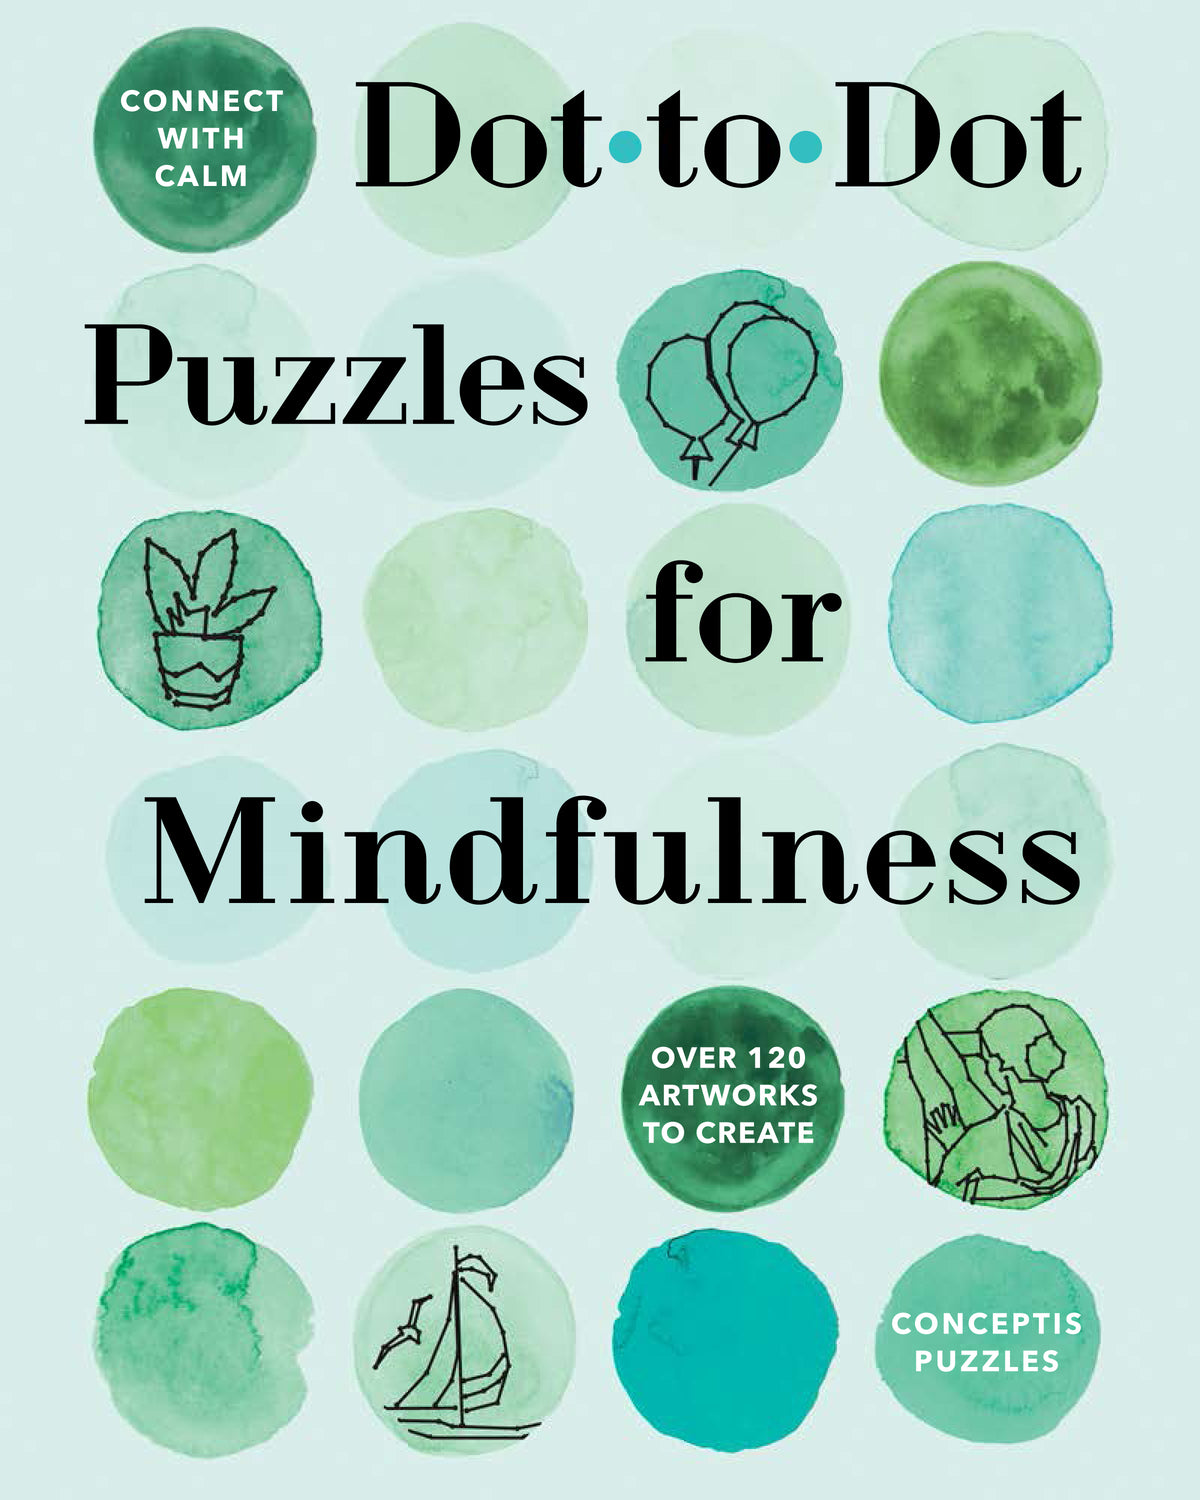 Dot-to-Dot Puzzles for Mindfulness